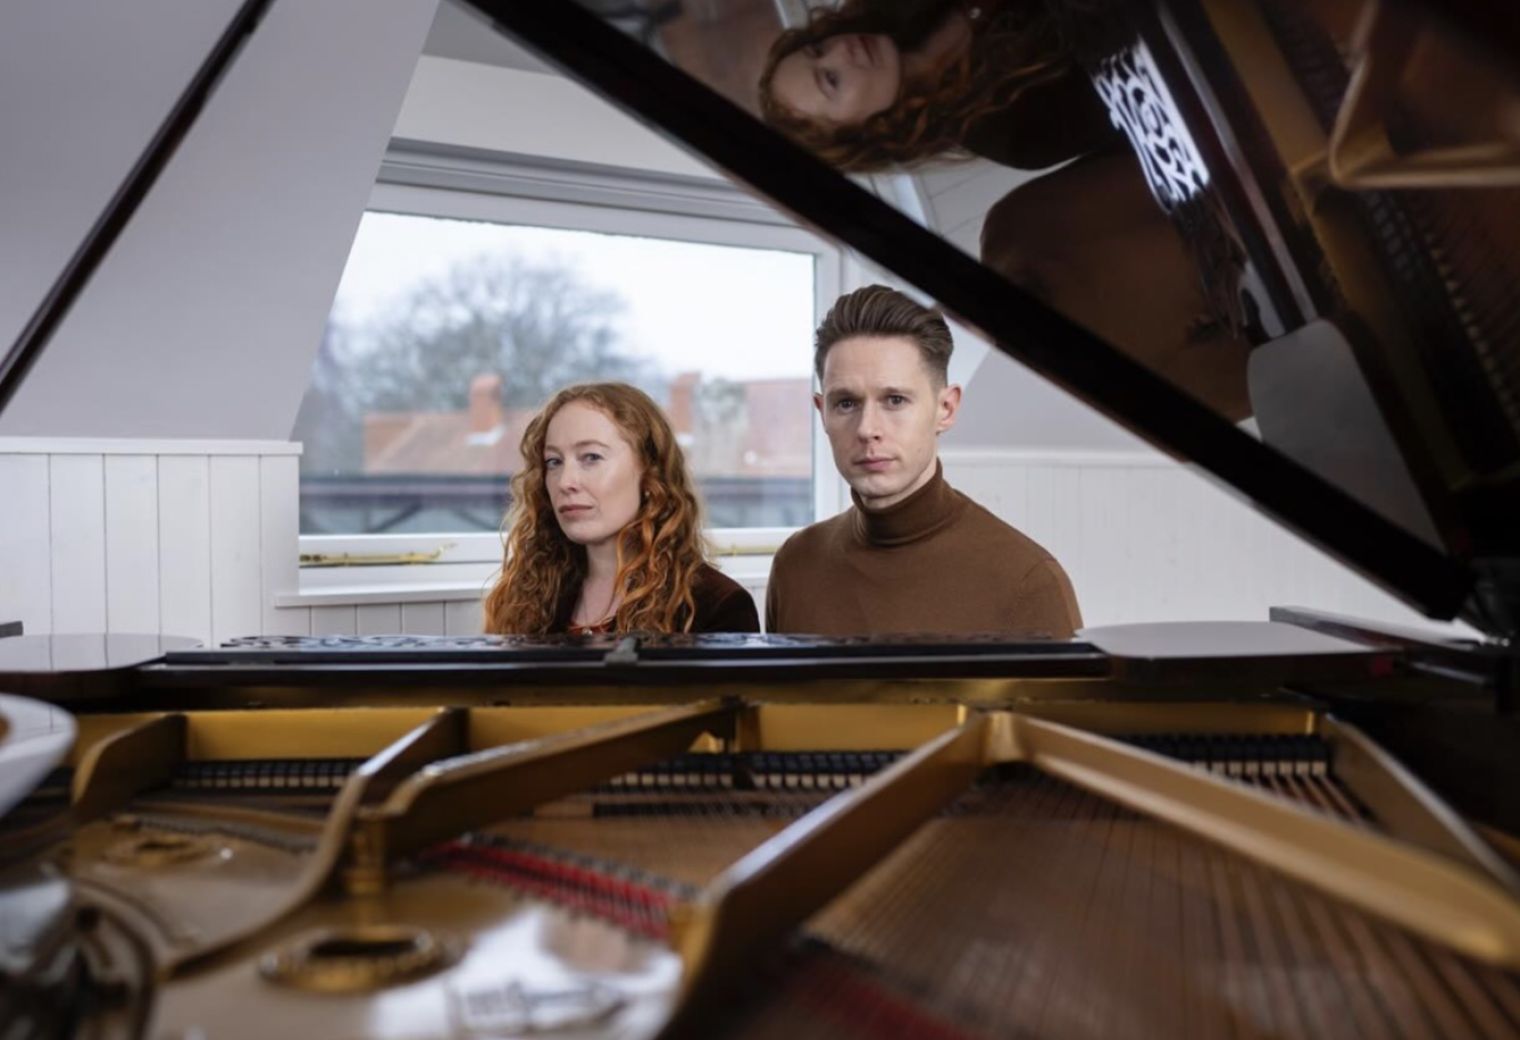 Samuel Barnett stars as composer Benjamin Britten in 'Ben and Imo', playing at the Swan Theatre, Stratford-upon-Avon from 21st February